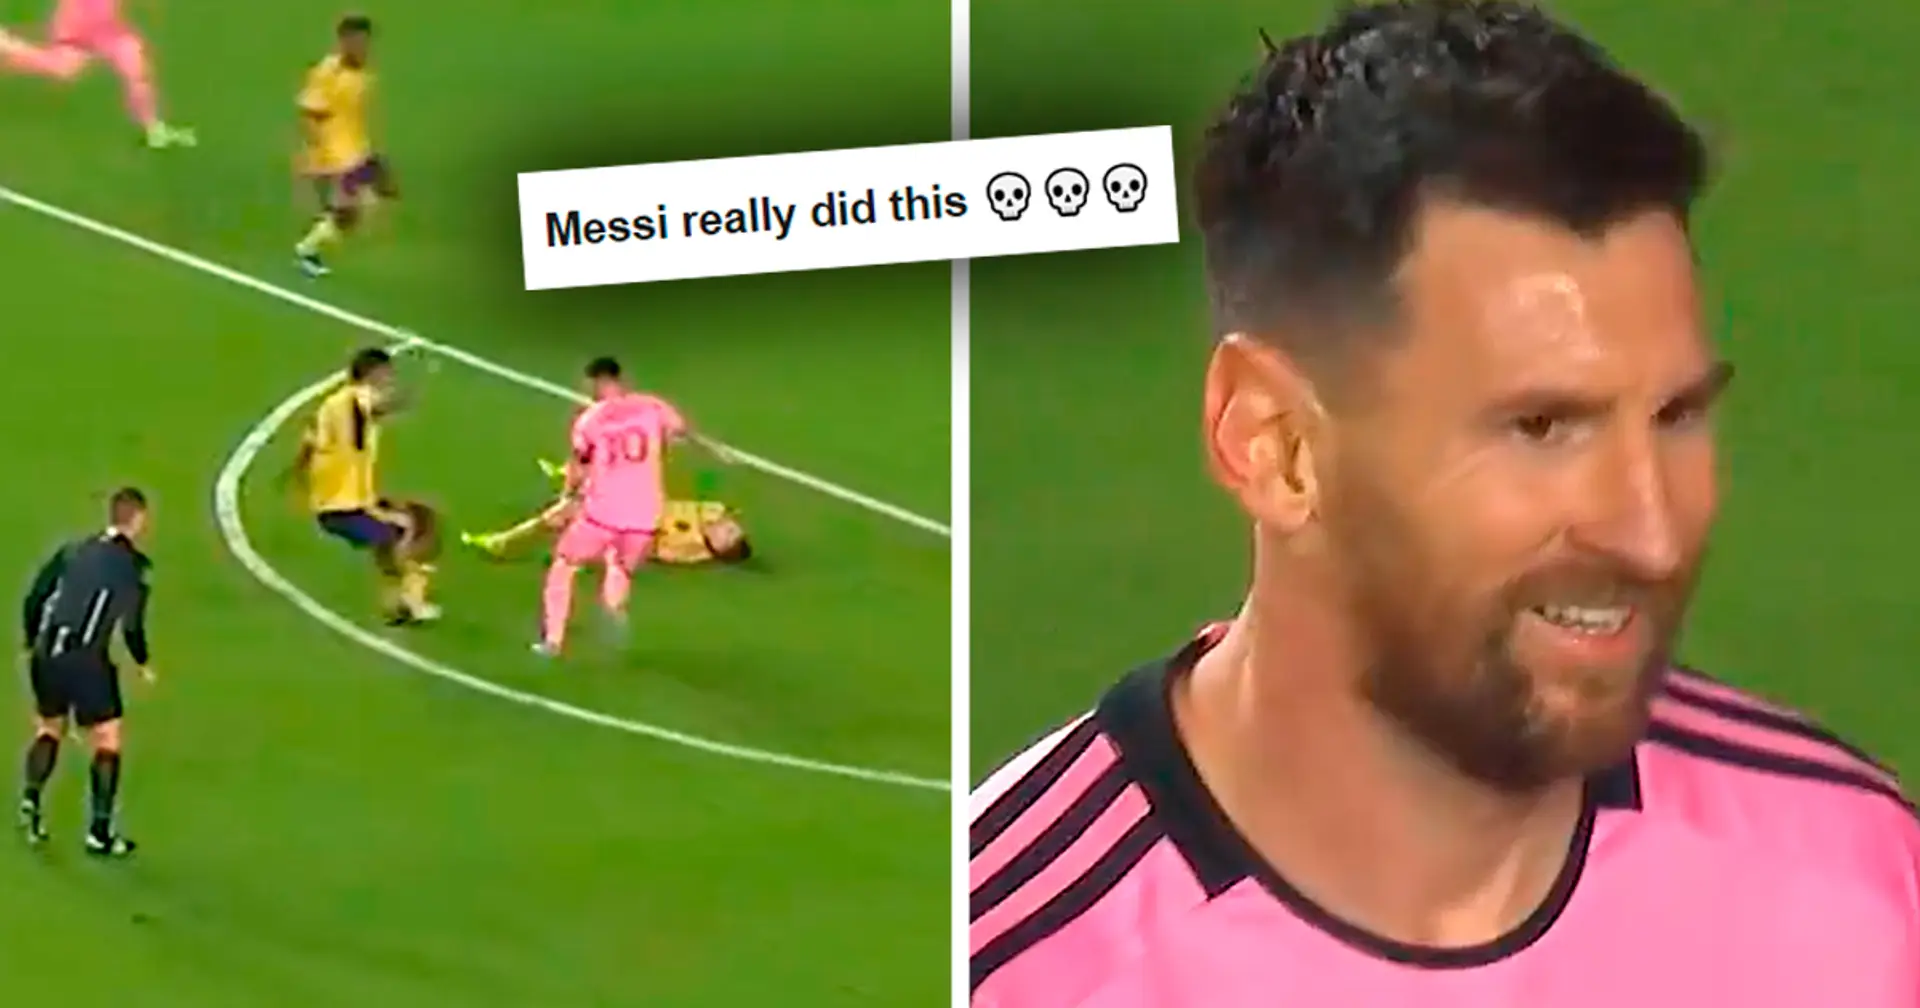 Spotted: Messi chips a player who is down injured – video goes viral ...